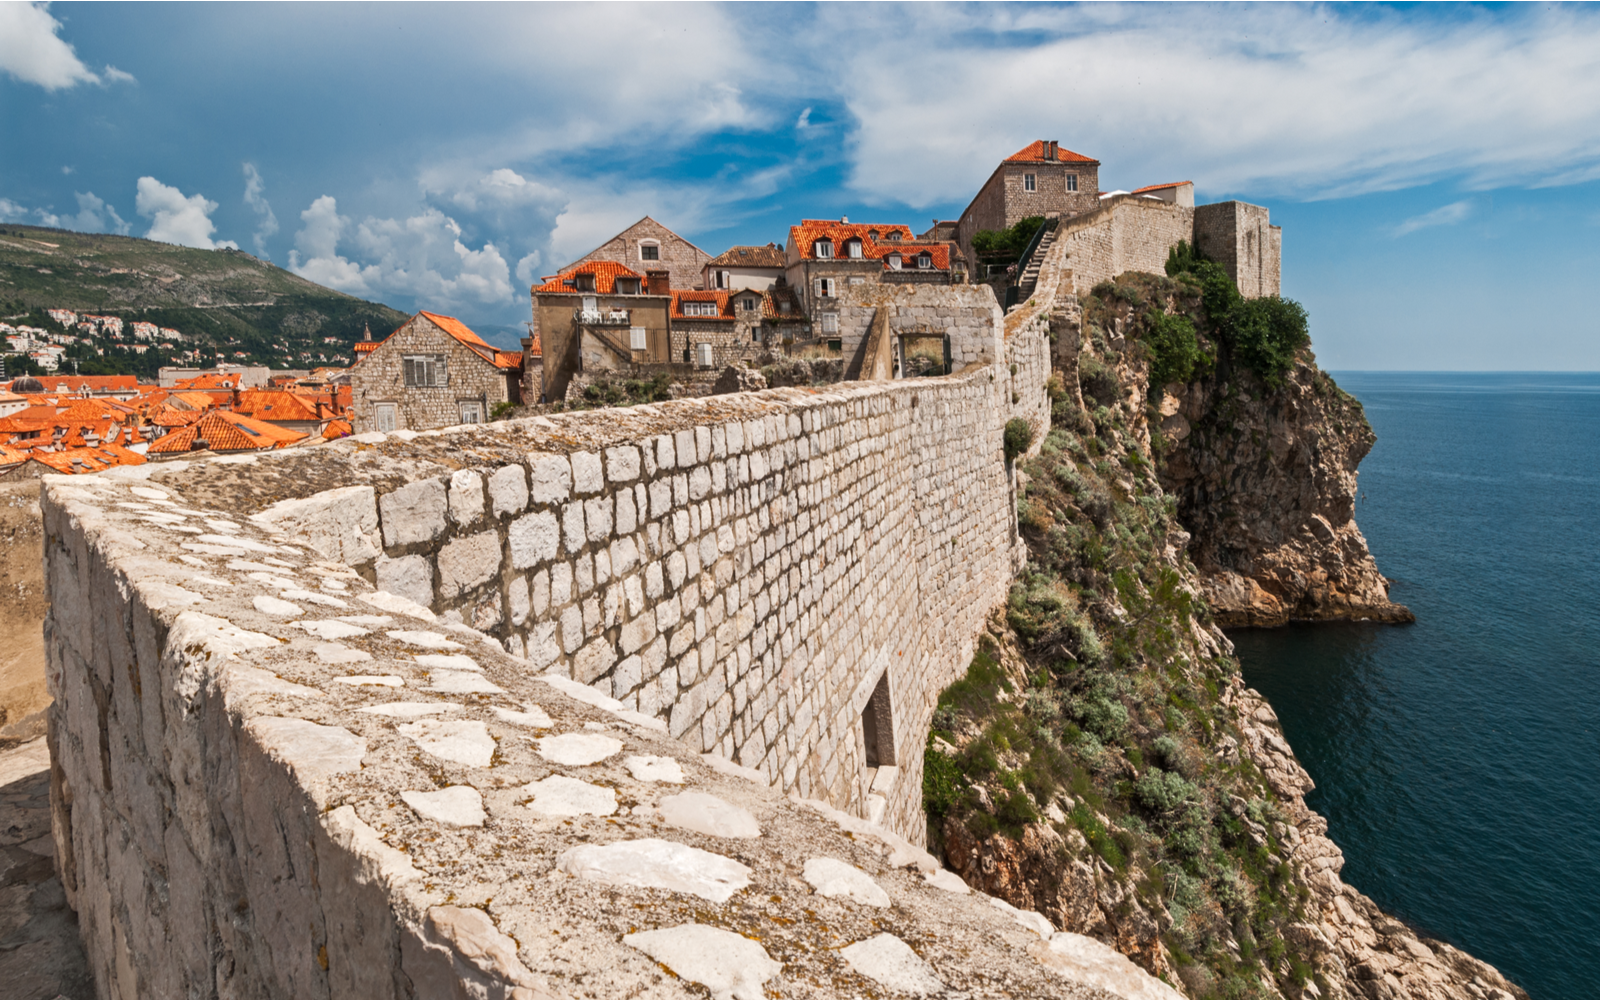 Amazing walled city of Dubrovnik in Croatia, one of our favorite Game of Thrones filming locations to visit